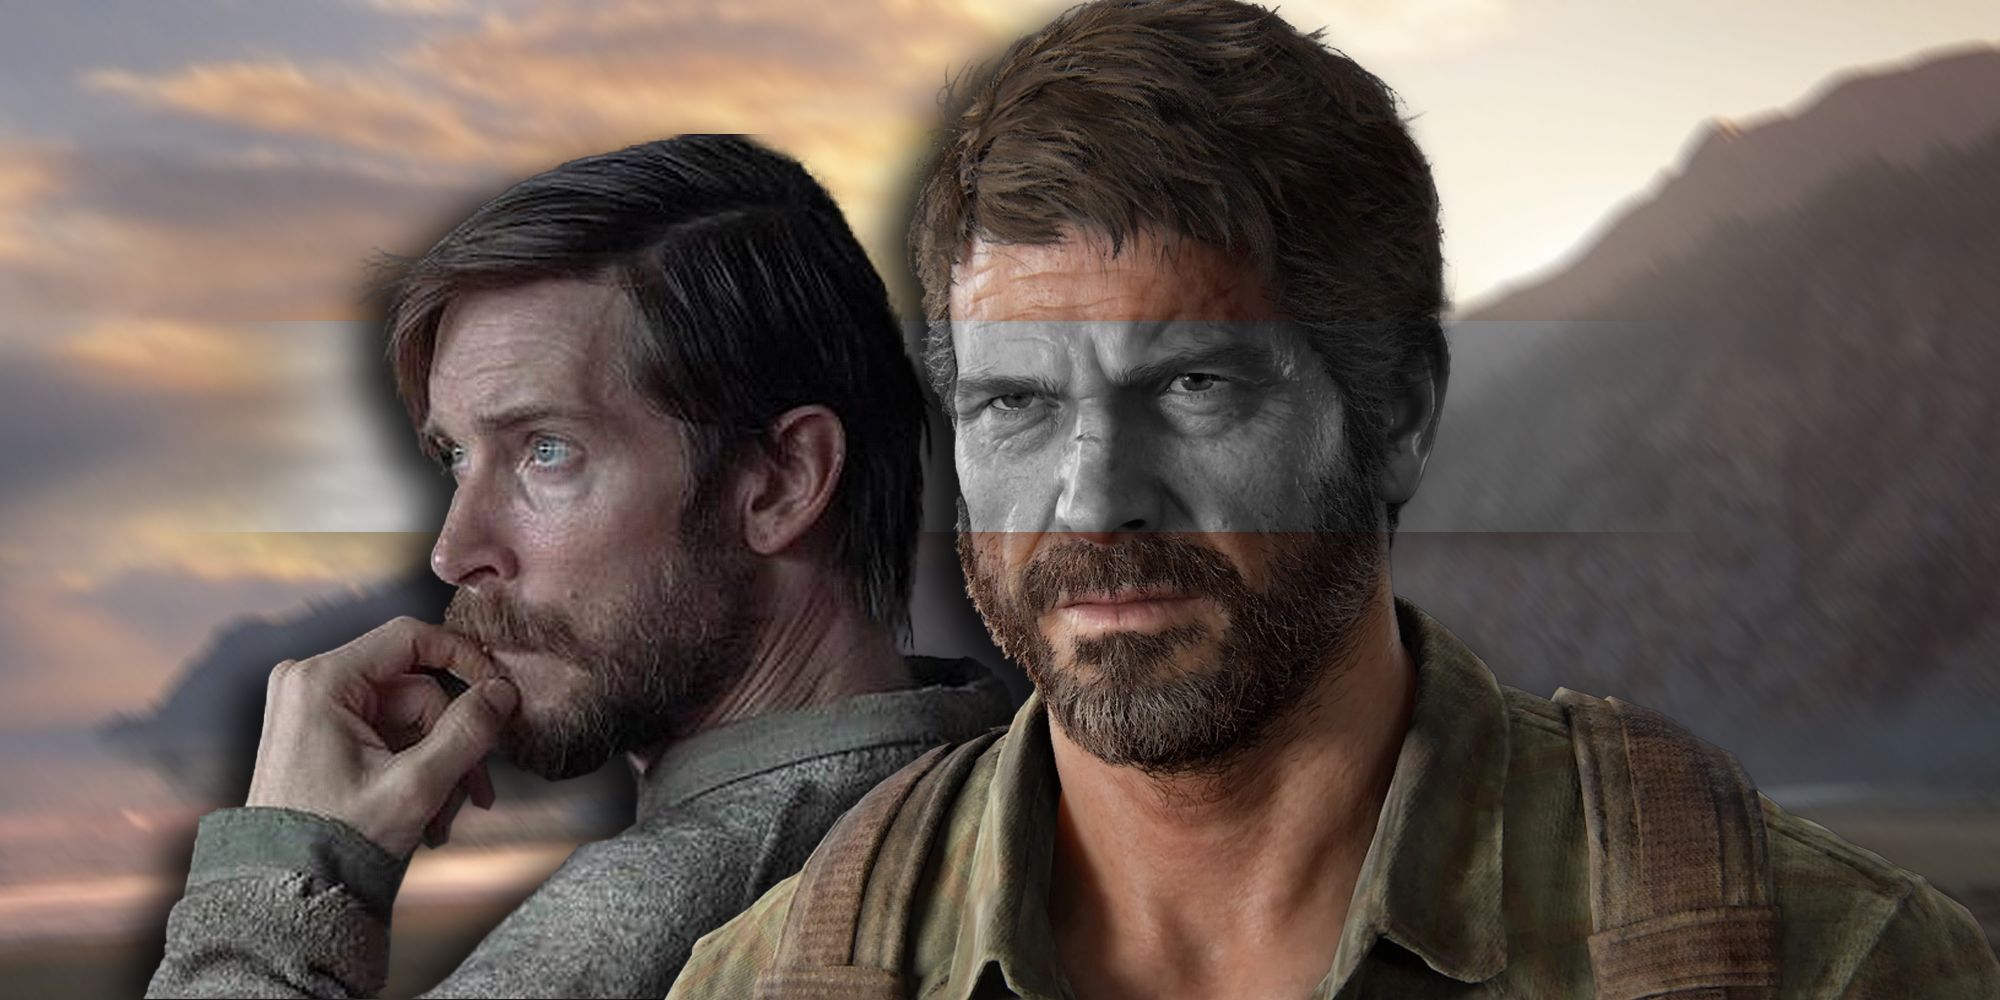 Troy Baker On Joel's Fate In The Last Of Us: “I Want People To Wrestle With  It”